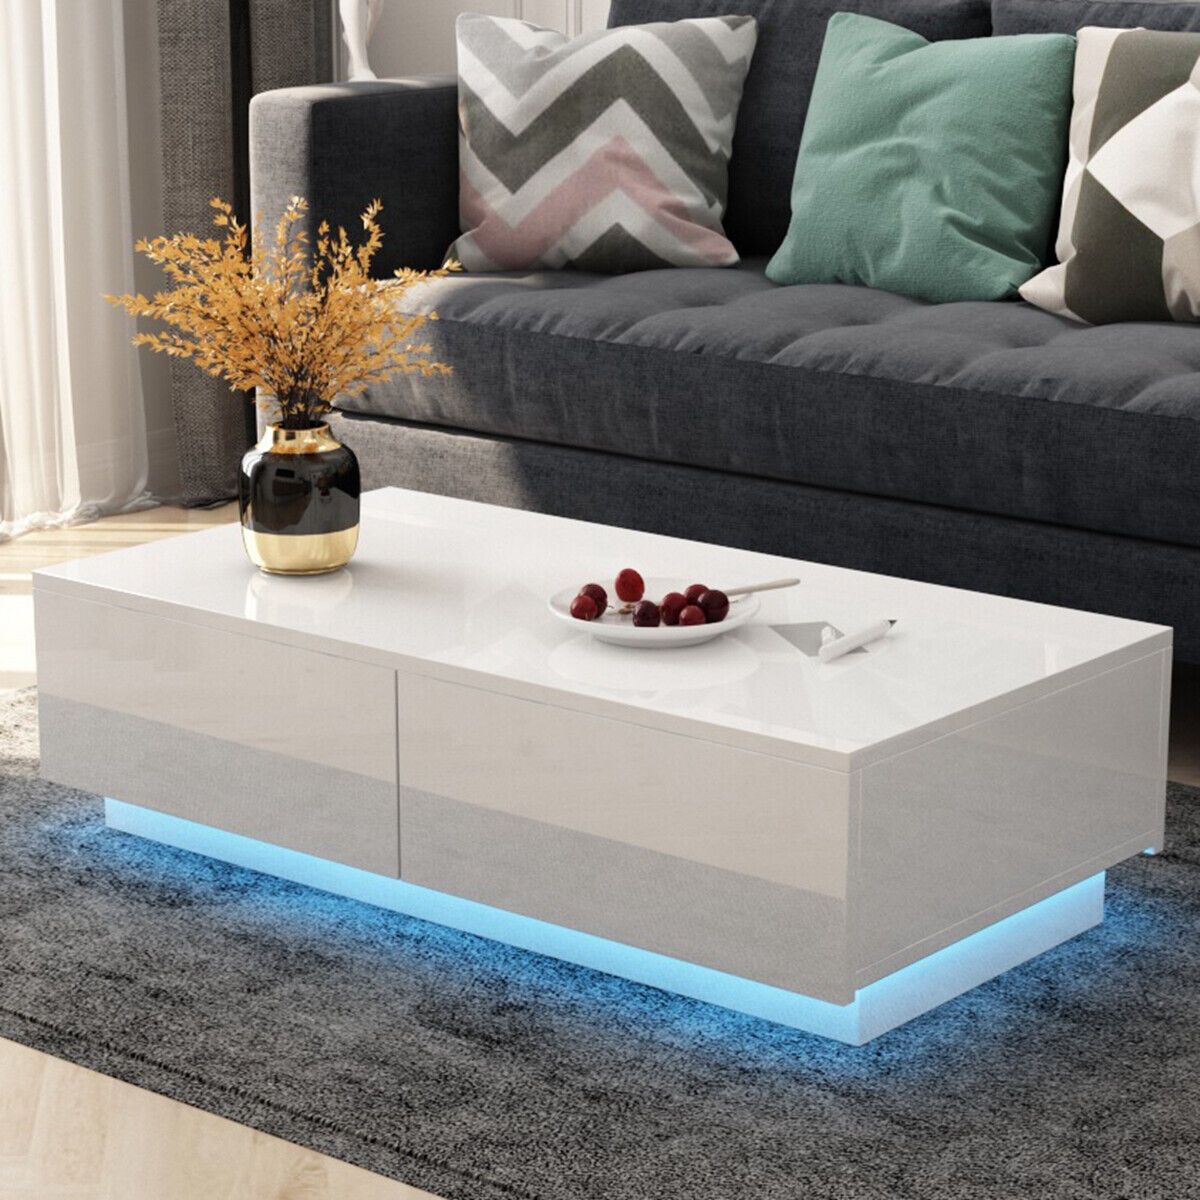 Led Coffee Tables W 4 Drawers High Gloss Side Table Center Table Living  Room Set | Ebay Intended For Led Coffee Tables With 4 Drawers (View 11 of 15)